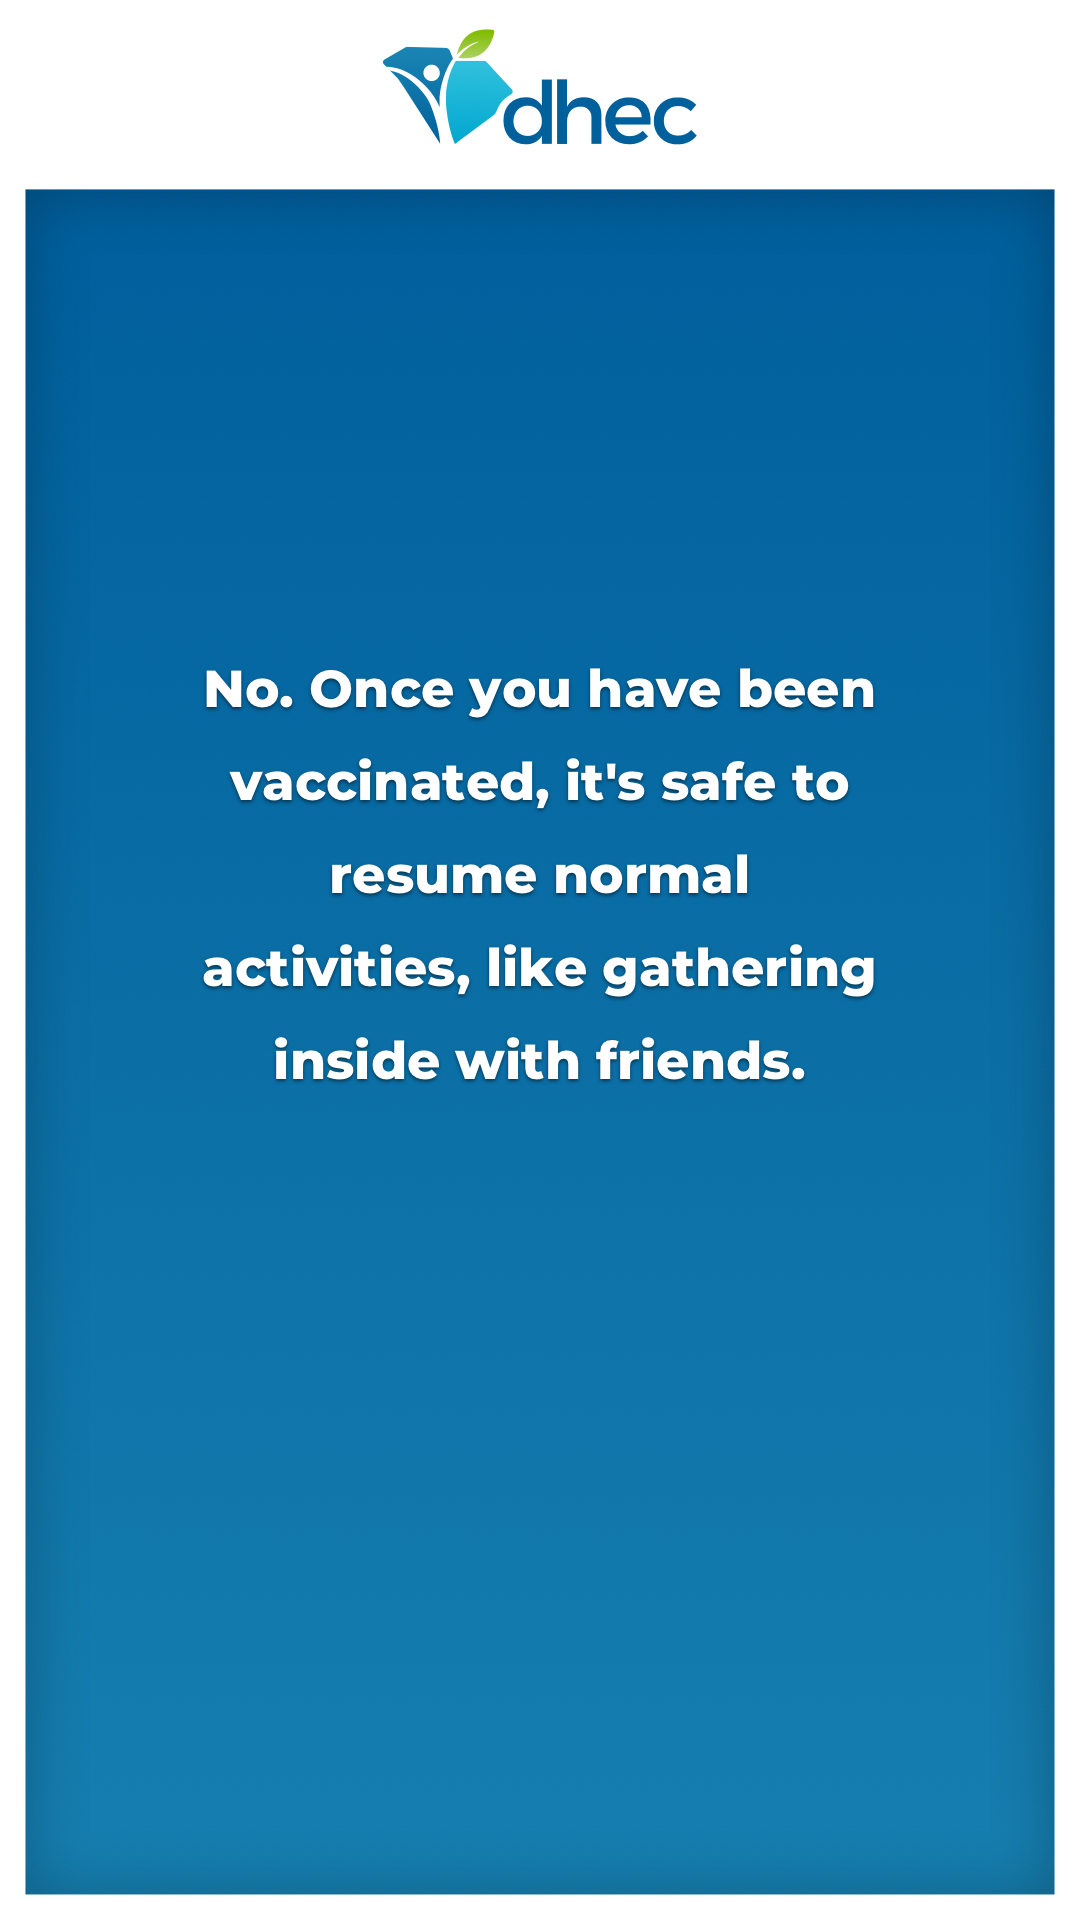 No. Once you have been vaccinated, it's safe to resume normal activities, like gathering inside with friends.